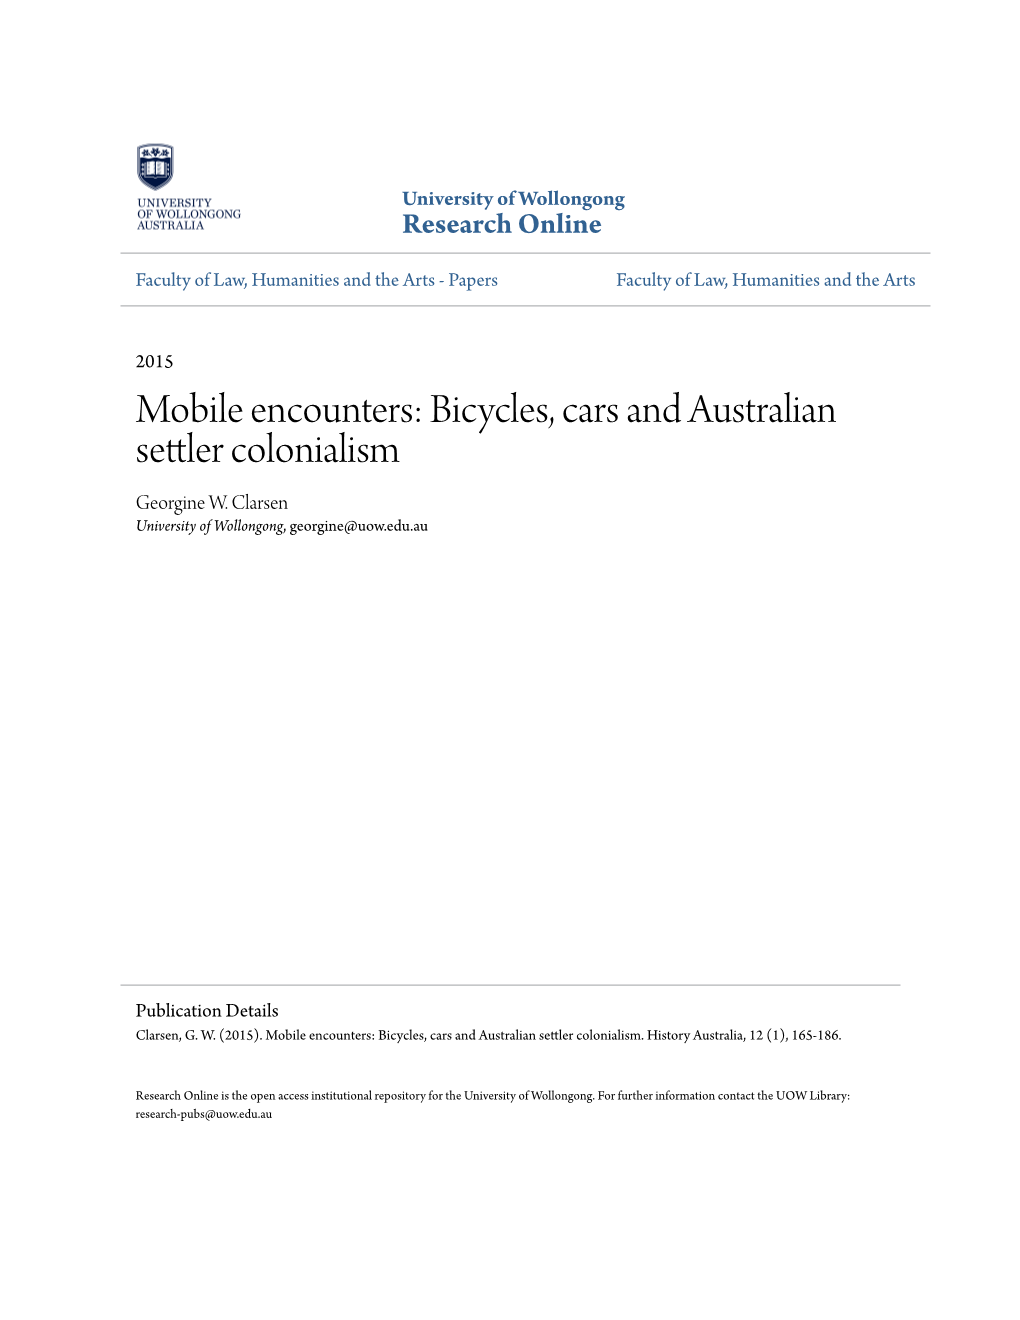 Bicycles, Cars and Australian Settler Colonialism Georgine W